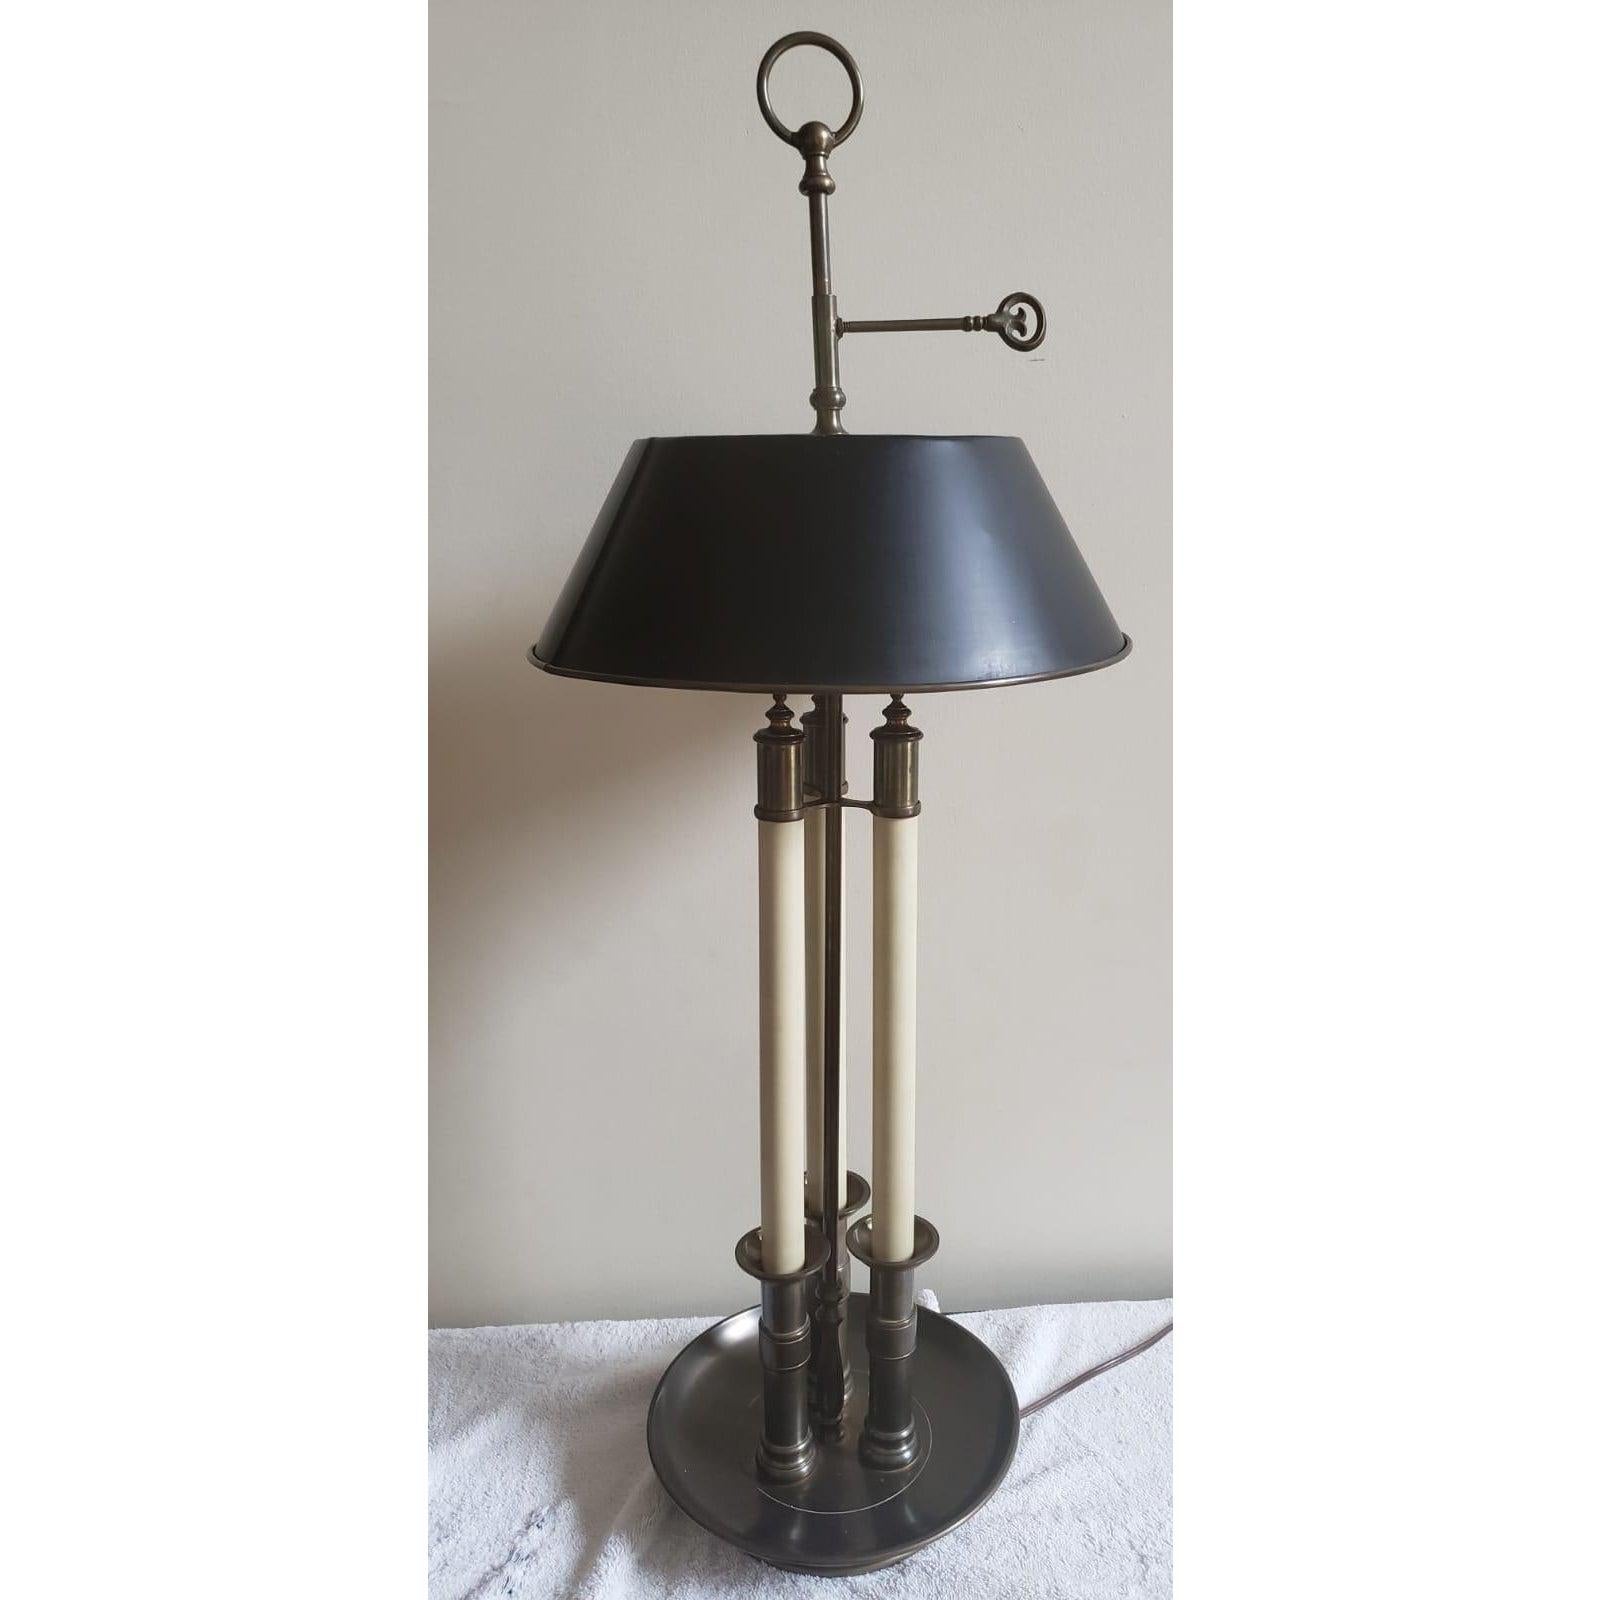 1972 Chapman patinated Metal Bouillotte Lamp with Tole Shade For Sale 3